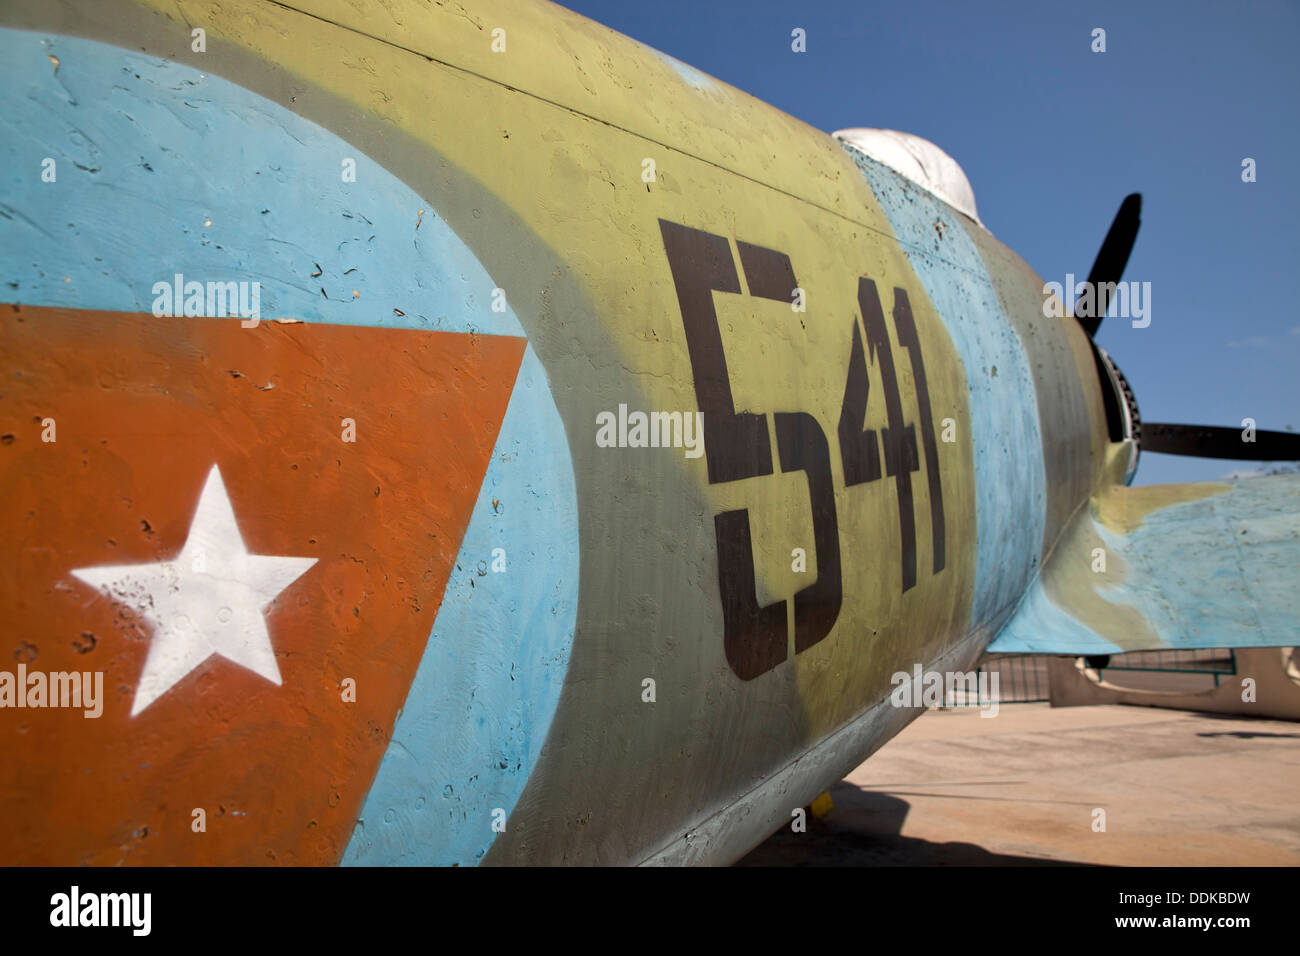 Fighter aircraft in cuban national colours at the Playa Giron (Giron beach) Museum at Bahia de Cochinos (Bay of Pigs), Cuba, Stock Photo